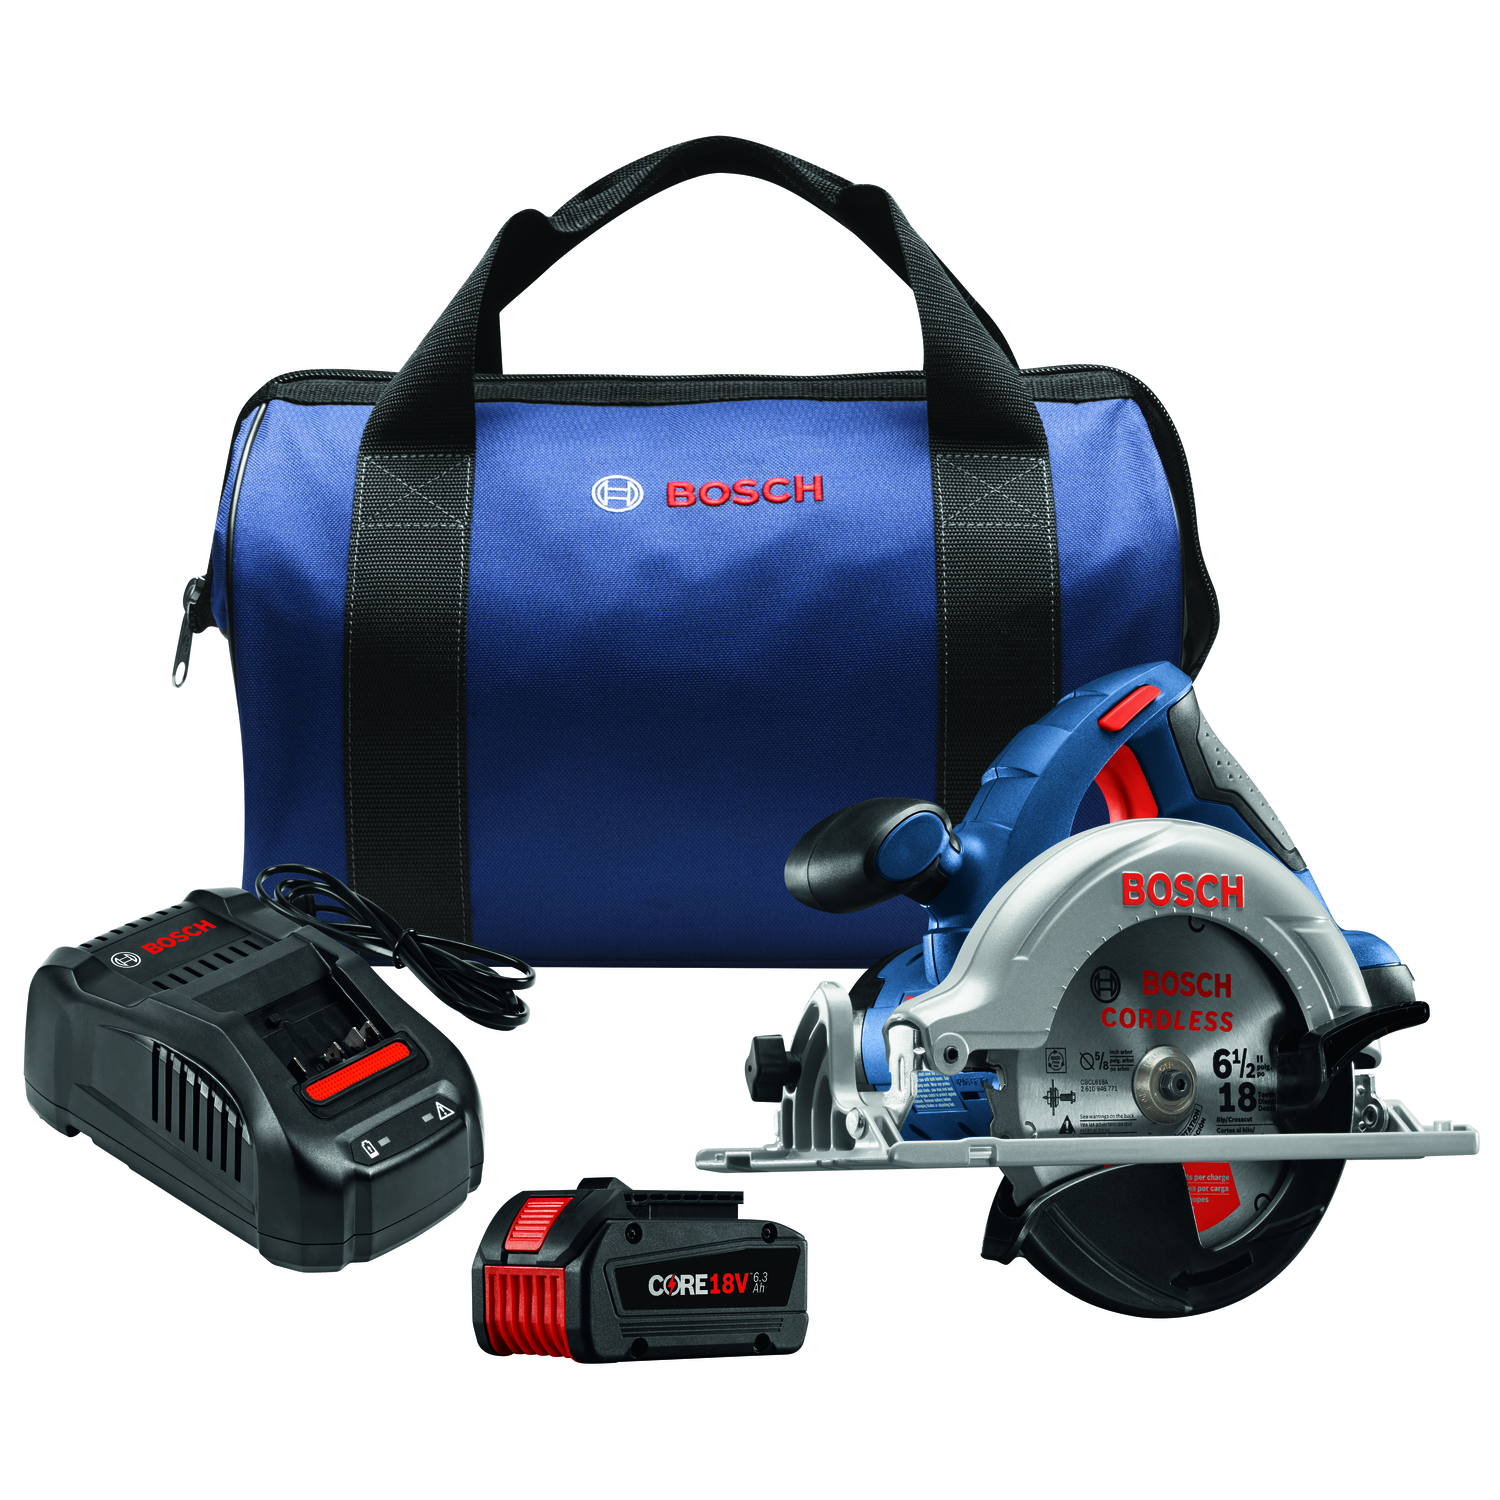 UPC 000346494884 product image for Bosch 6-1/2 in. 18 volt Cordless Circular Saw Kit 3900 rpm | upcitemdb.com